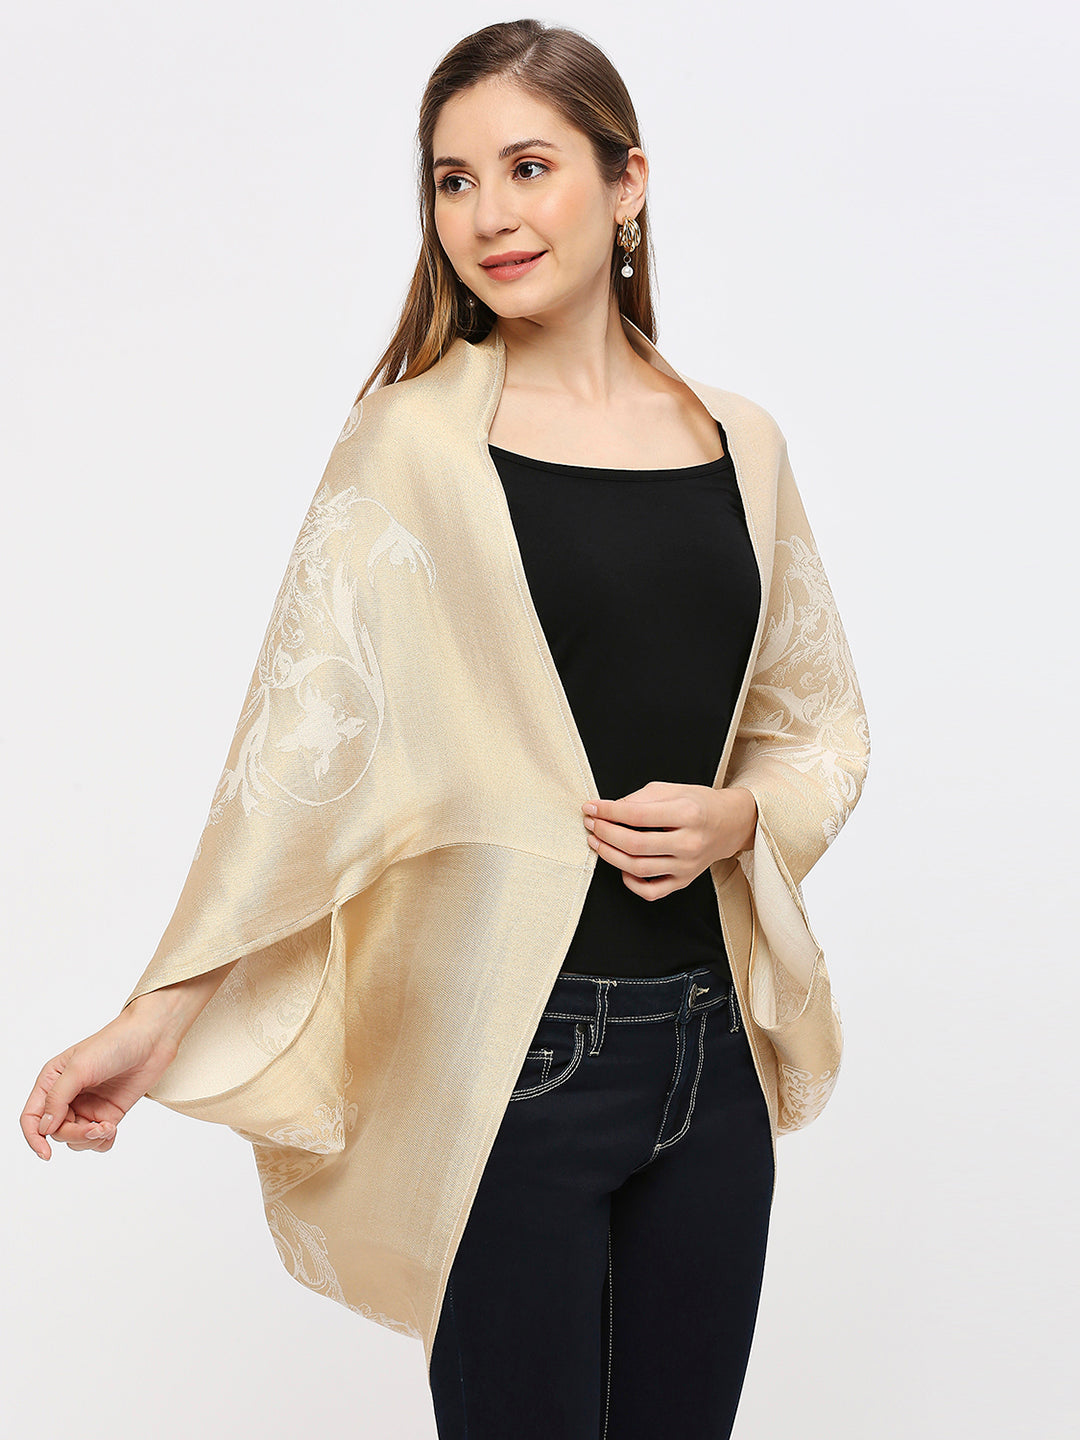 Brocade Italian King Patterned Off-White Cape